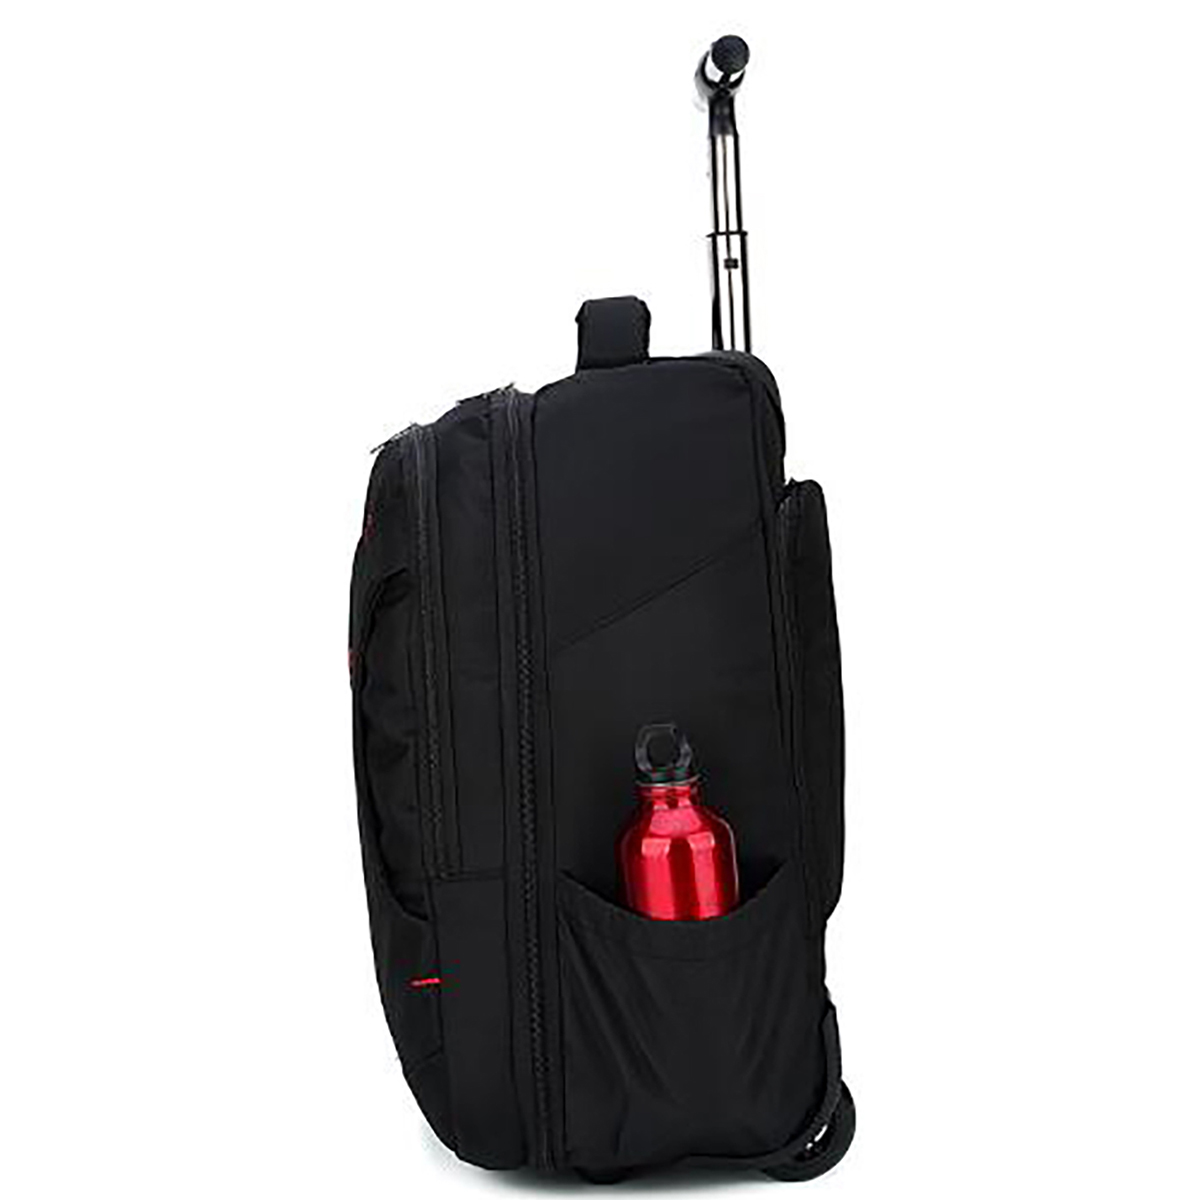 Find Travel Bag 18 inch Rolling Shoulders Backpack Trolley Luggage Suitcase Large Capacity Cabin Suitcases Business Laptop Bag for Sale on Gipsybee.com with cryptocurrencies